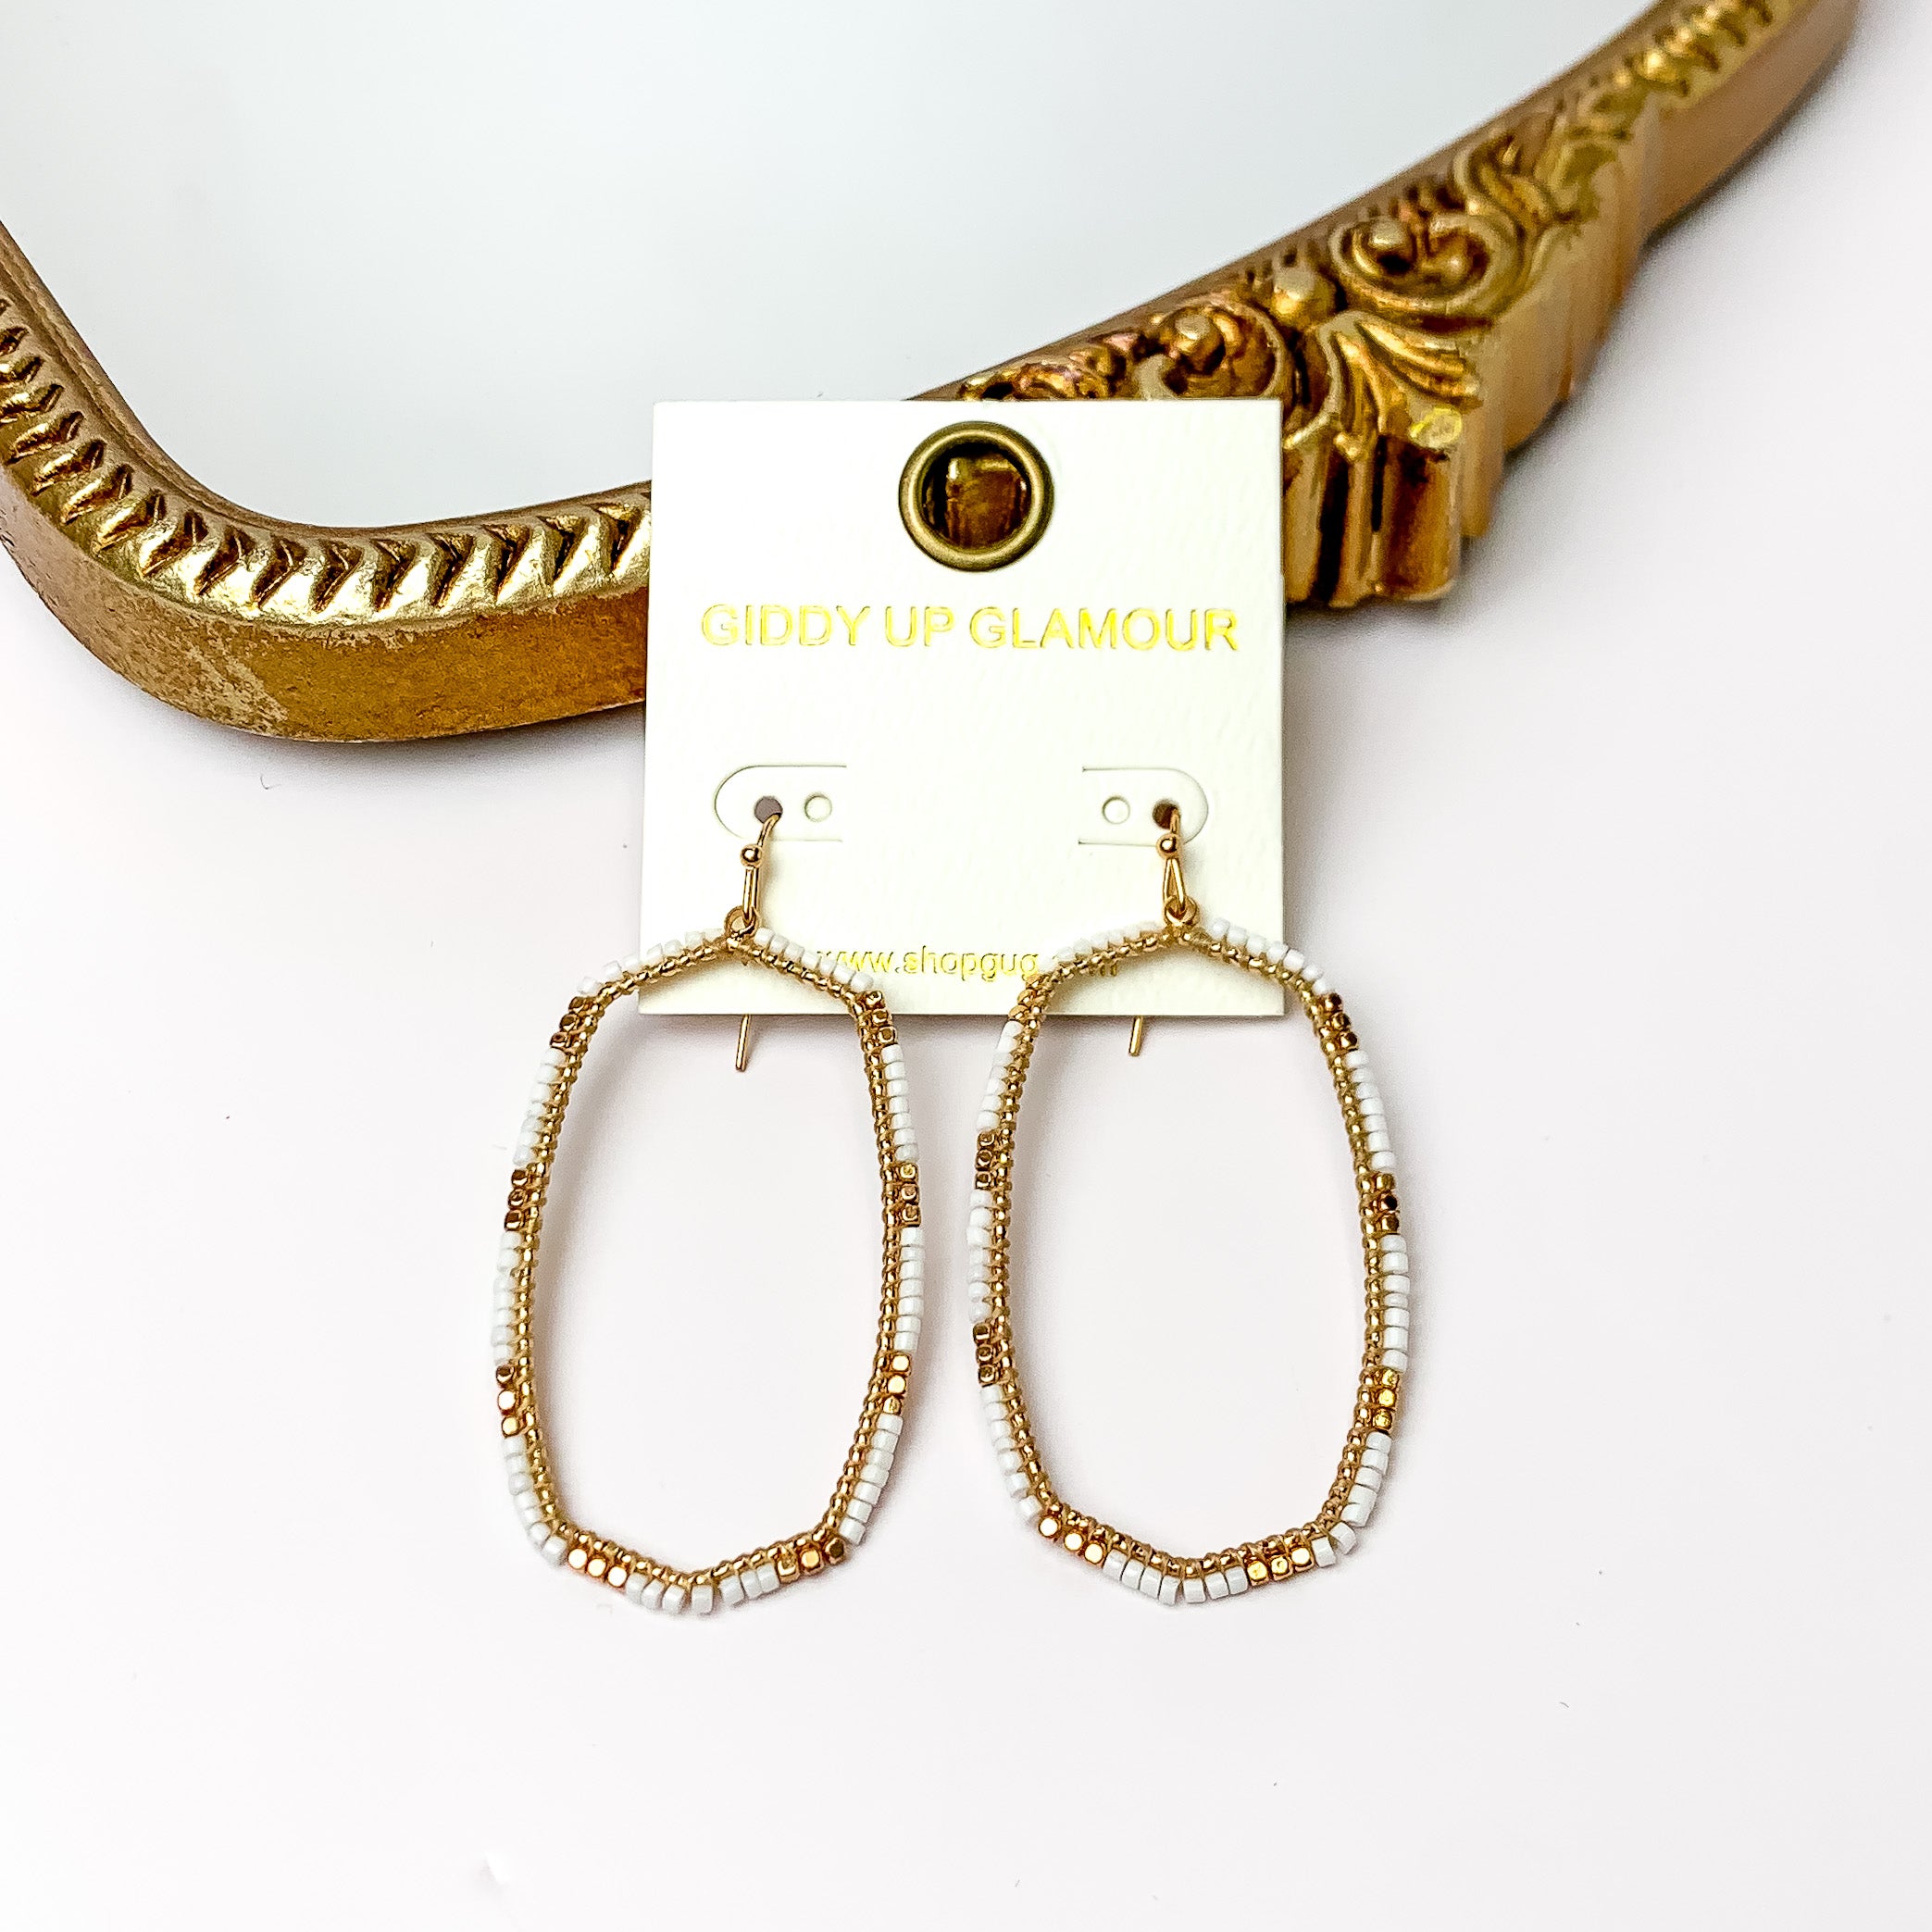 White Beaded Open Large Drop Earrings with Gold Tone Accessory. Pictured on a white background with a gold frame through it.